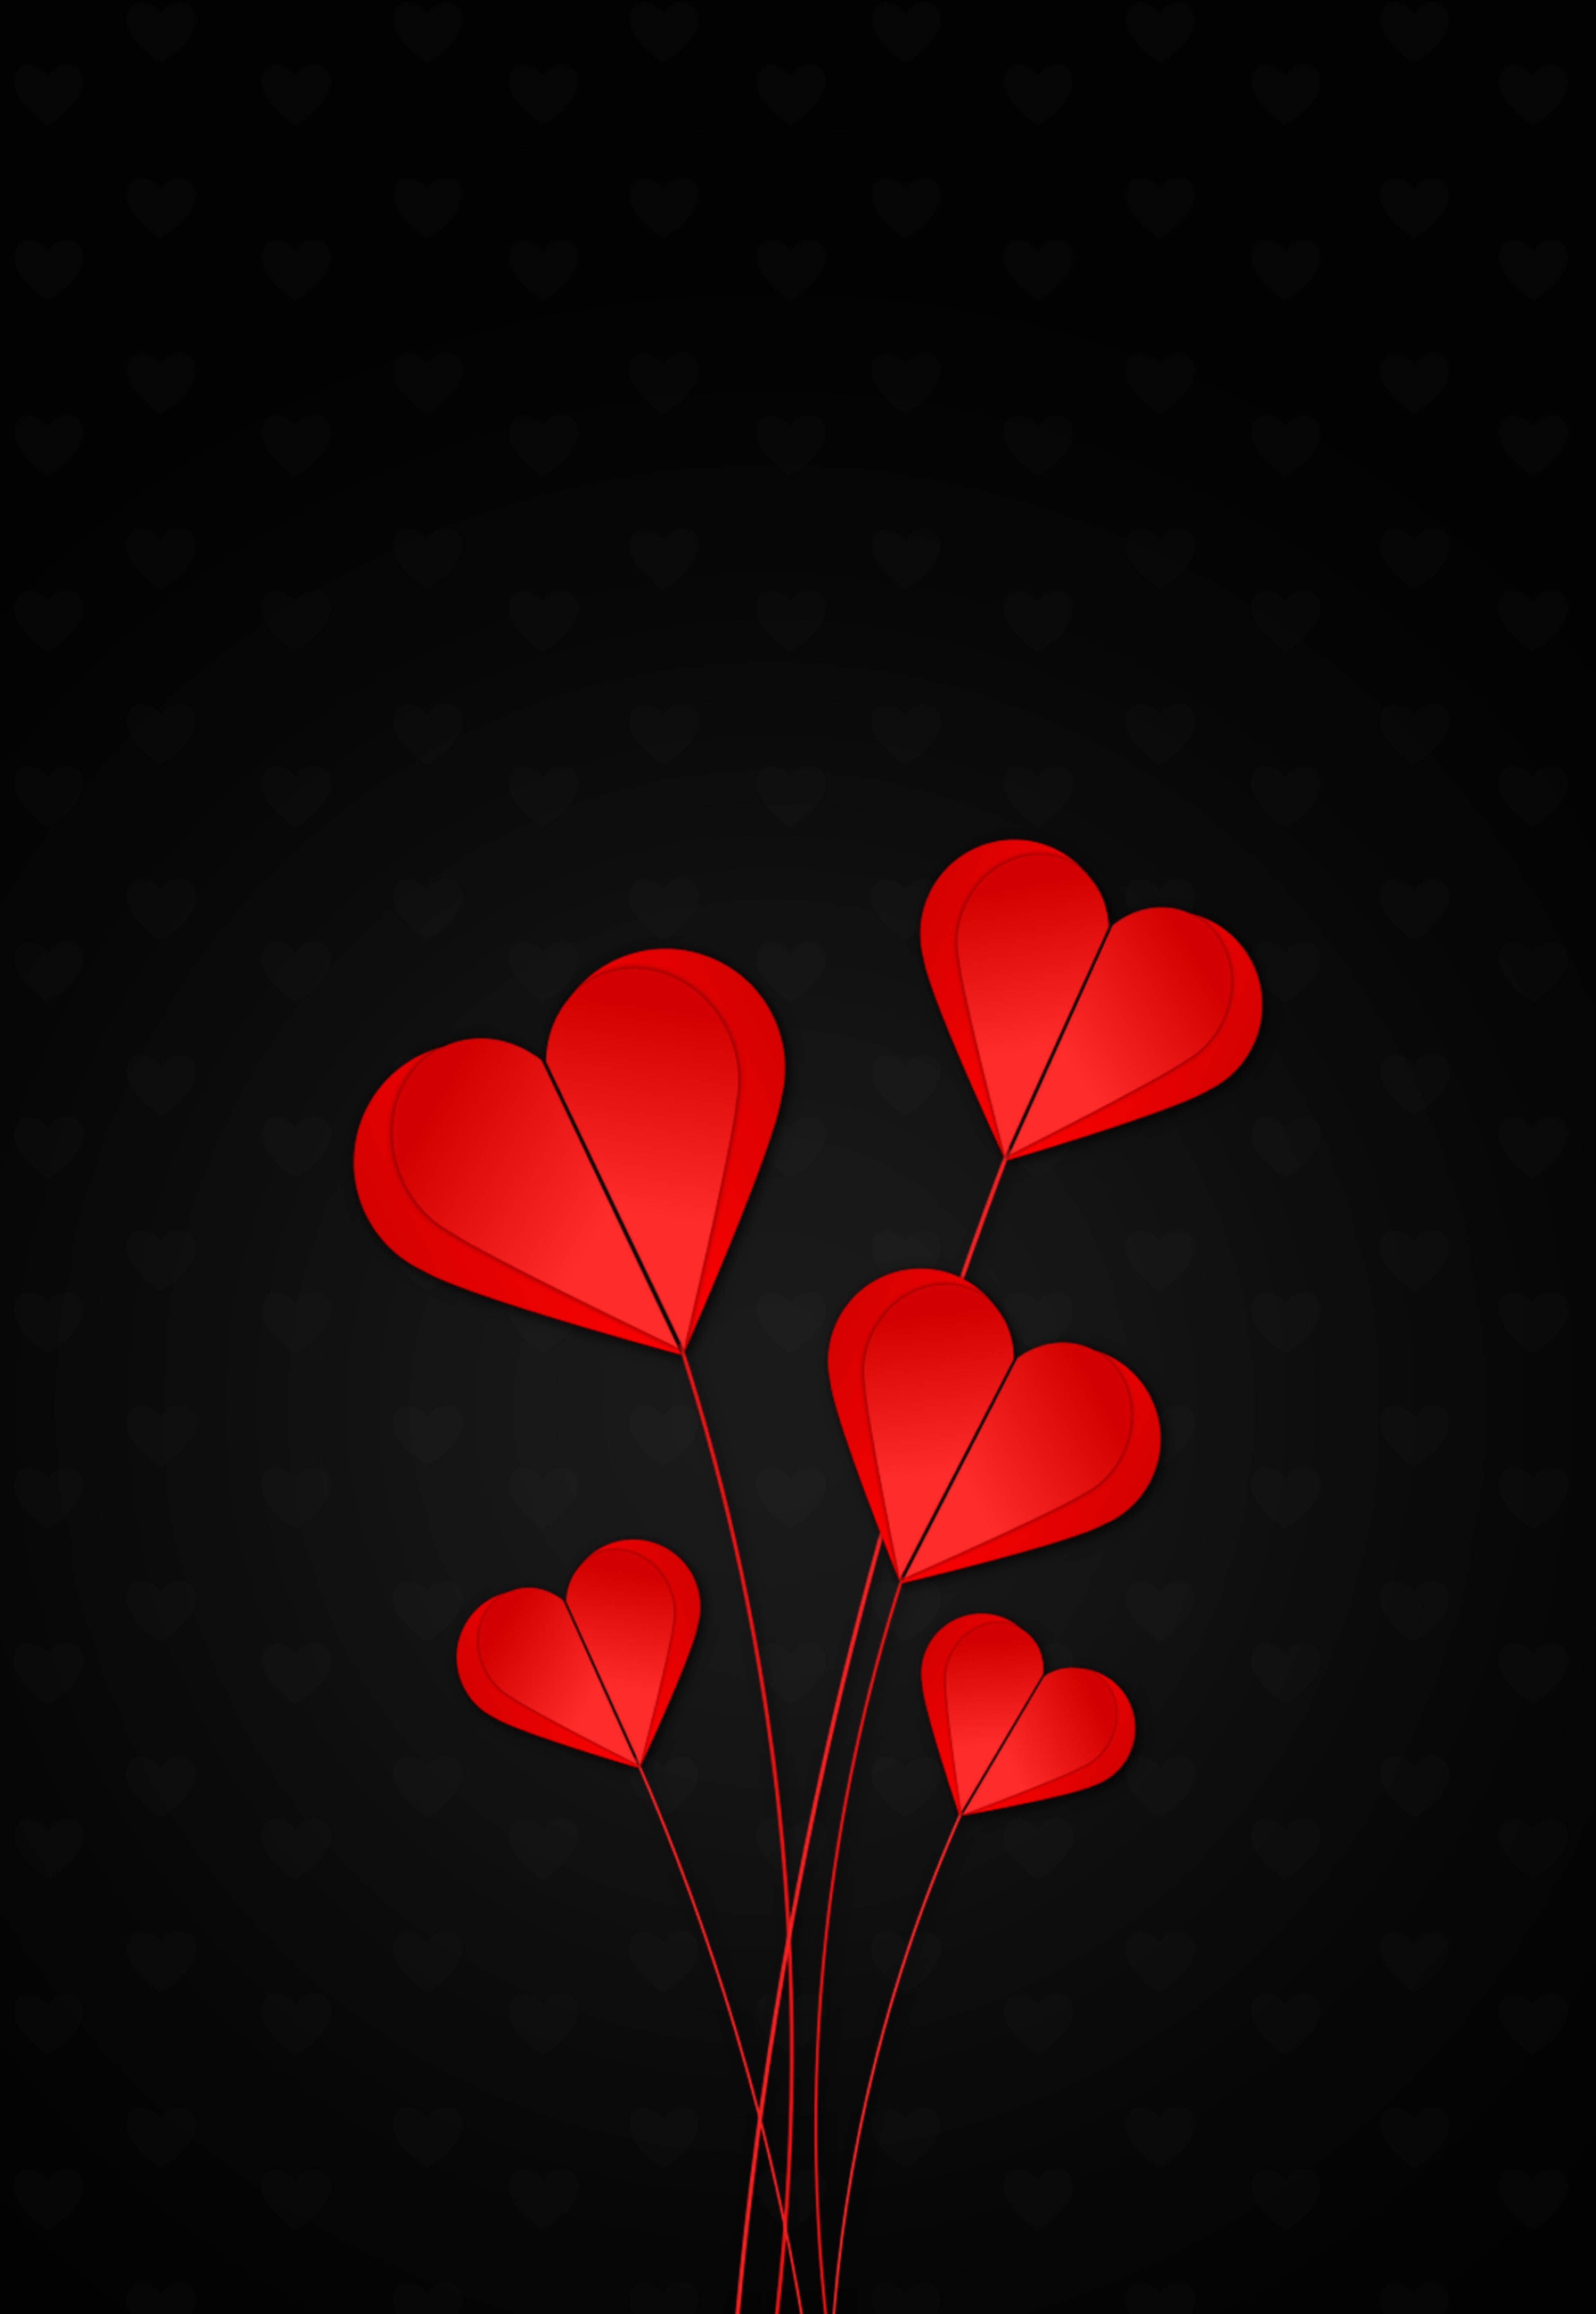 red, black background, hearts, love for android